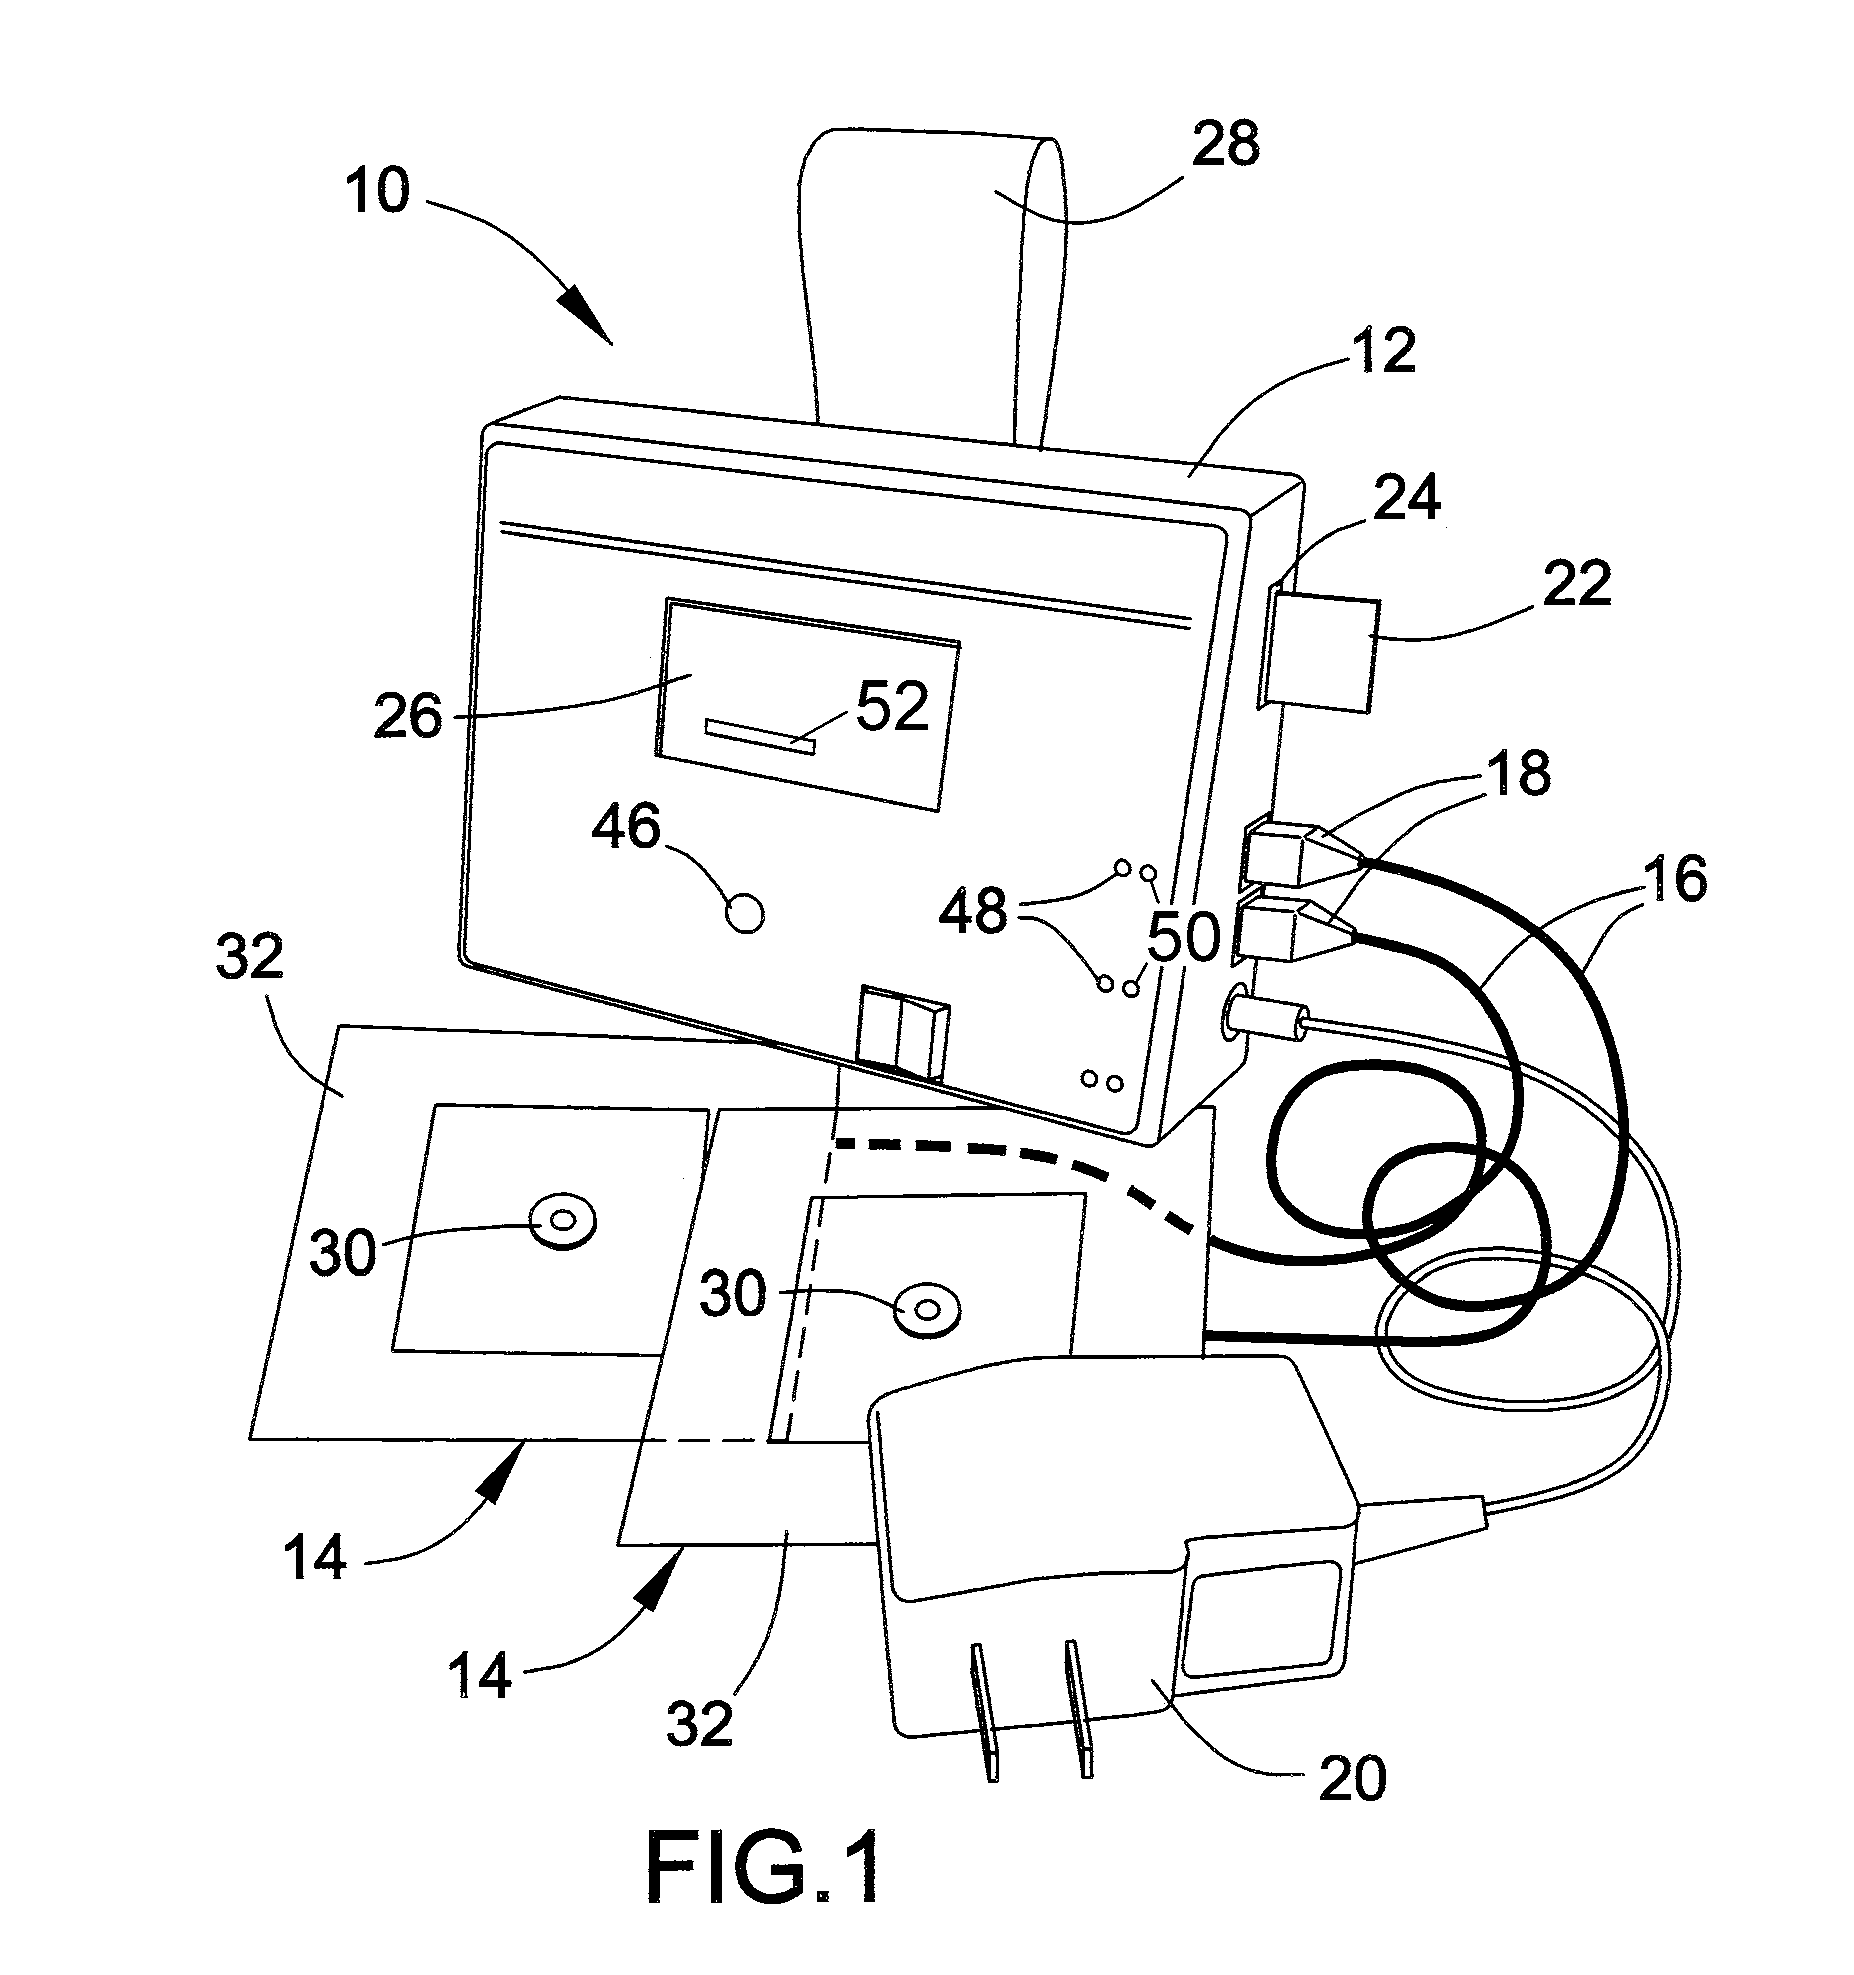 System and method of reducing risk and/or severity of pressure ulcers